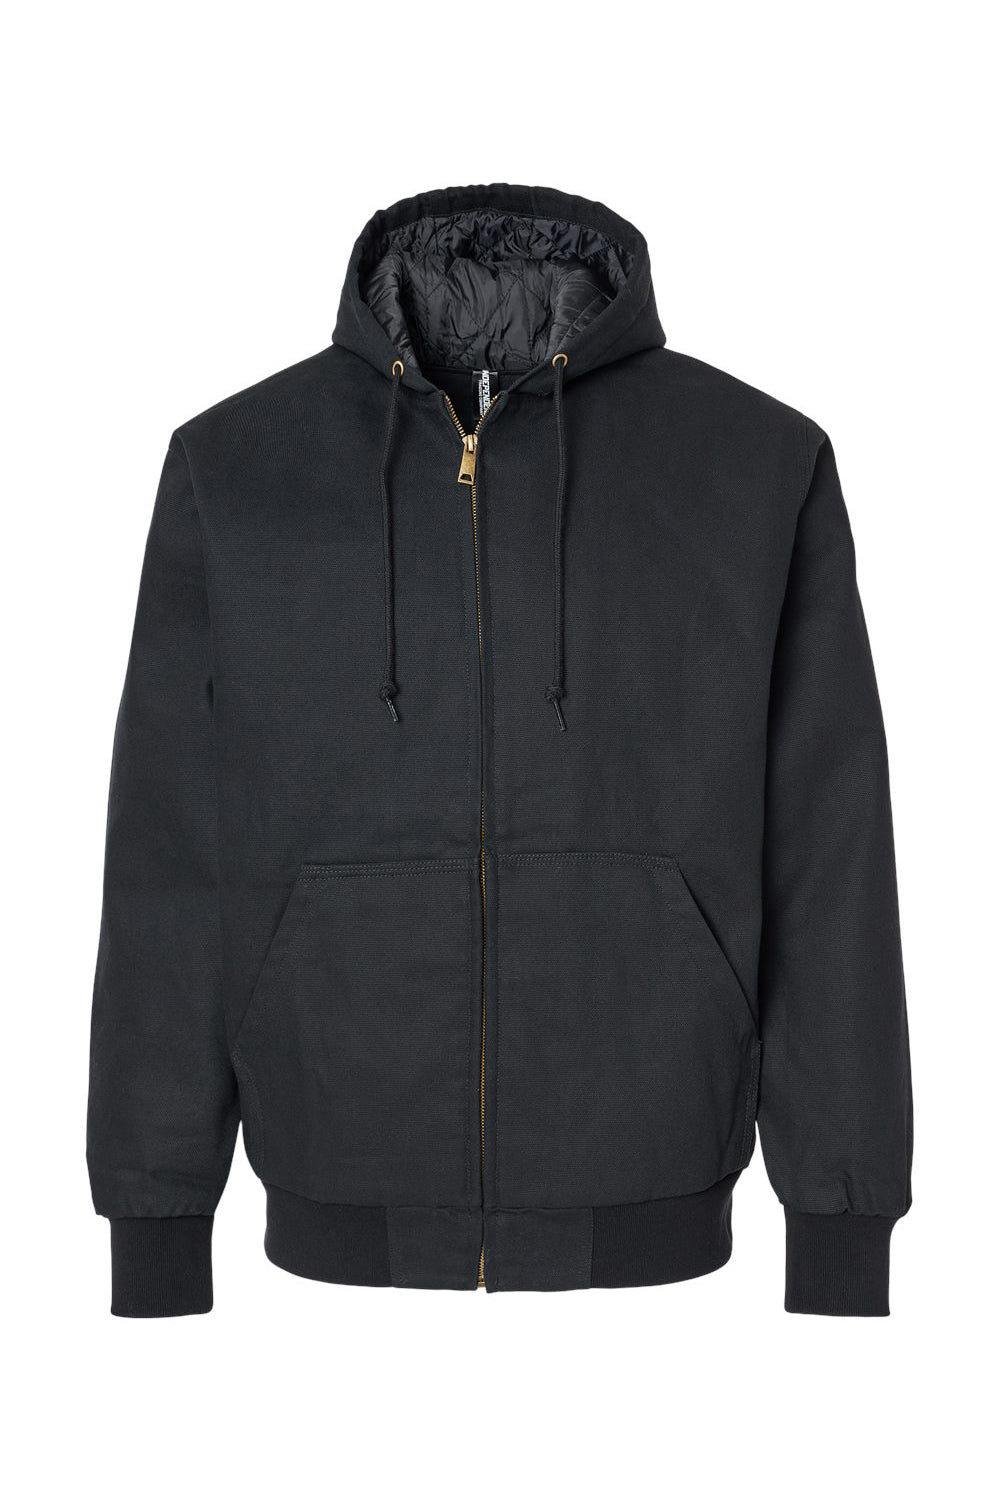 Independent Trading Co. EXP550Z Mens Insulated Canvas Full Zip Hoded Jacket Black Flat Front